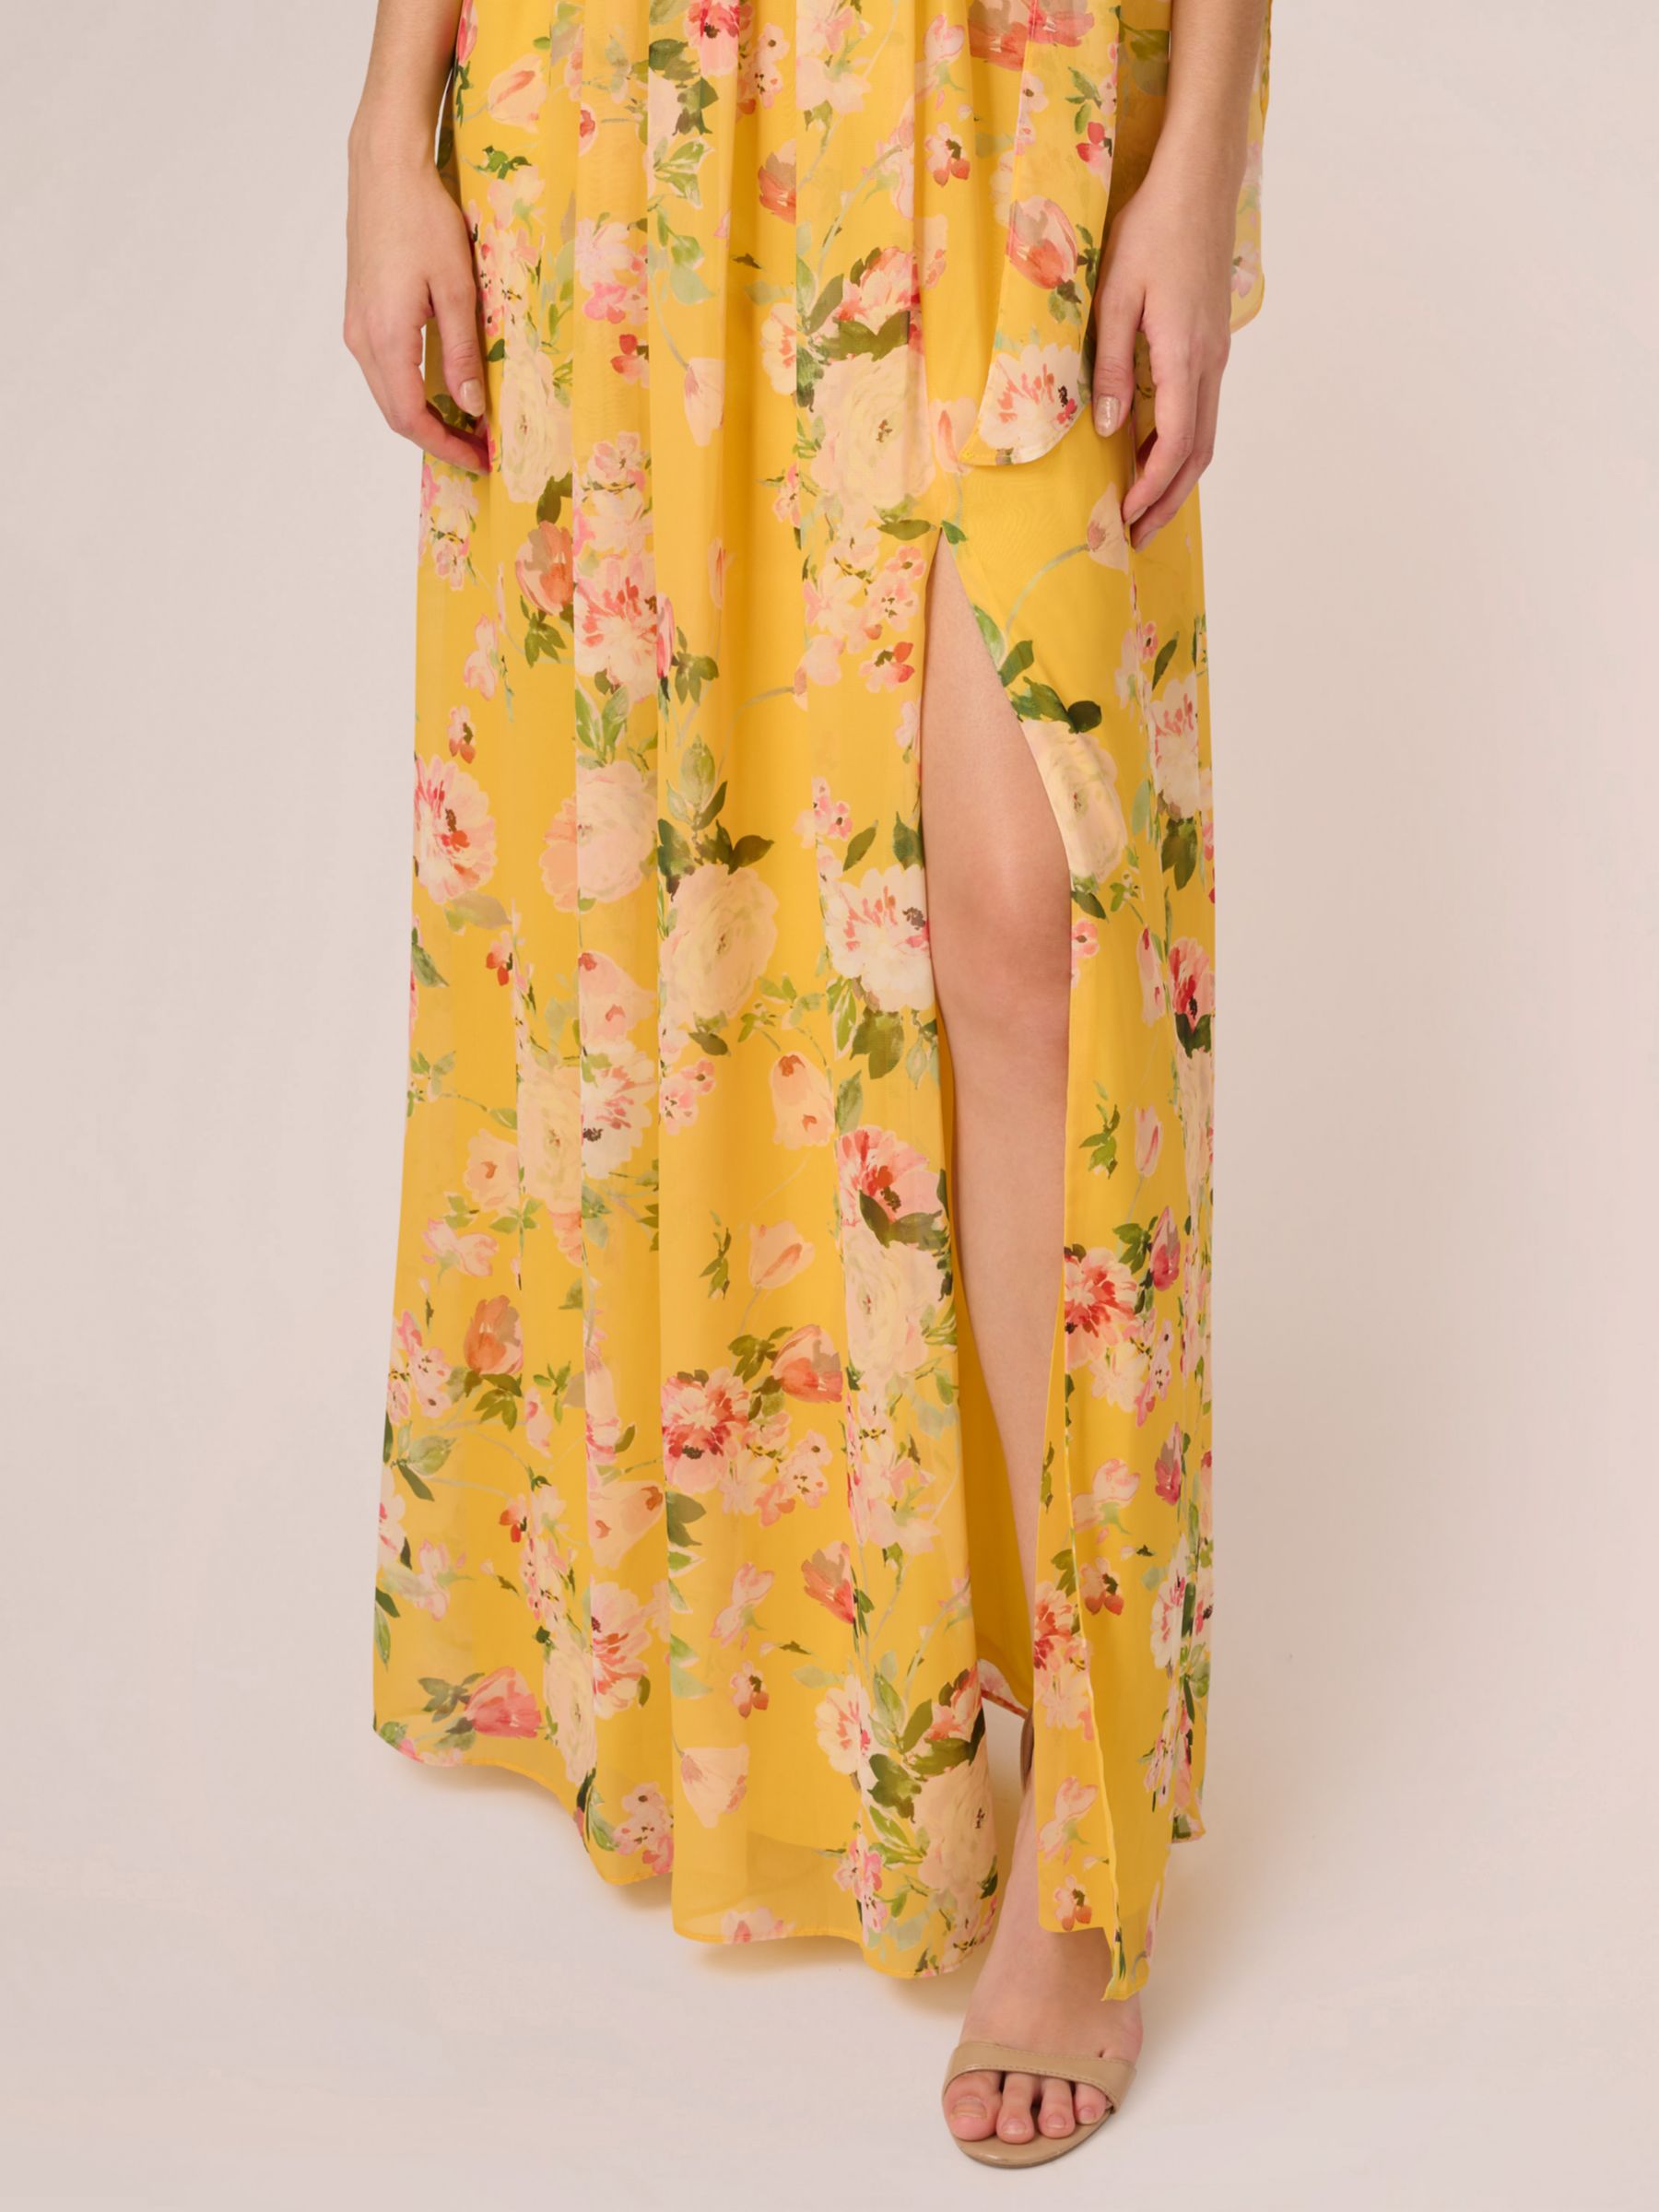 Adrianna Papell One Shoulder Floral Chiffon Maxi Dress, Yellow/Multi, 6